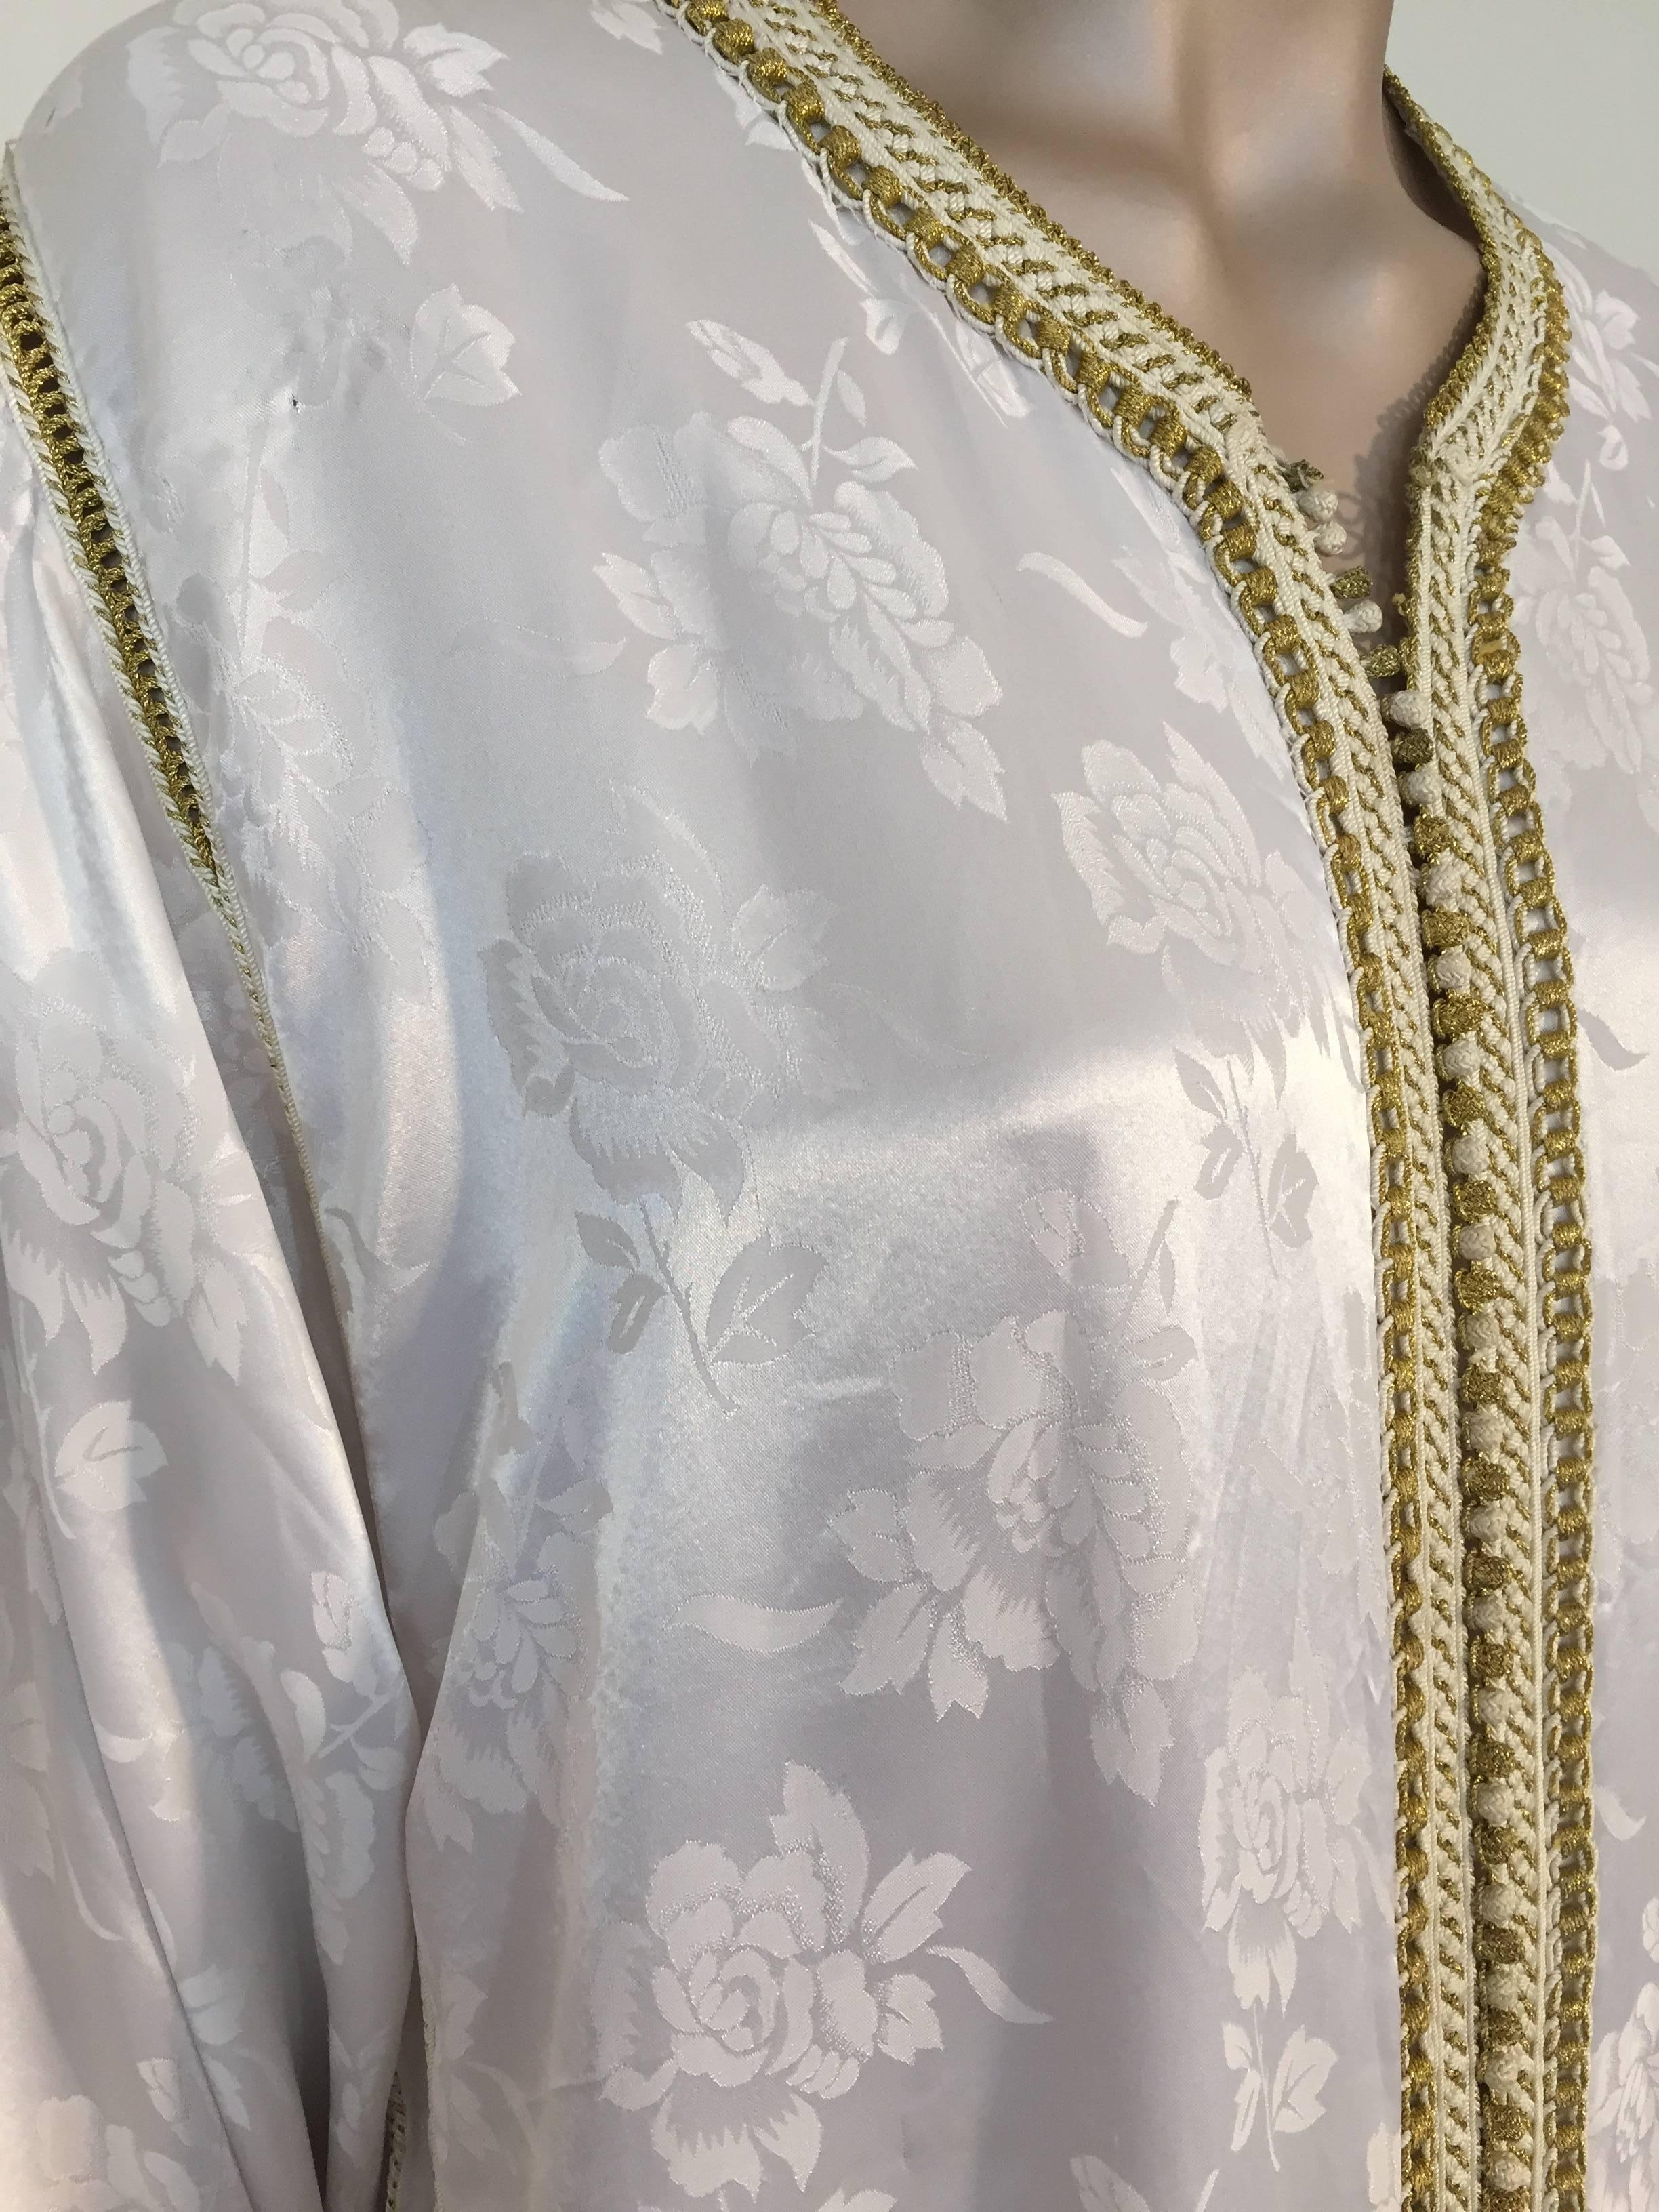 Moroccan Caftan Gown White Embroidered with Gold Trim, circa 1970 For Sale 1